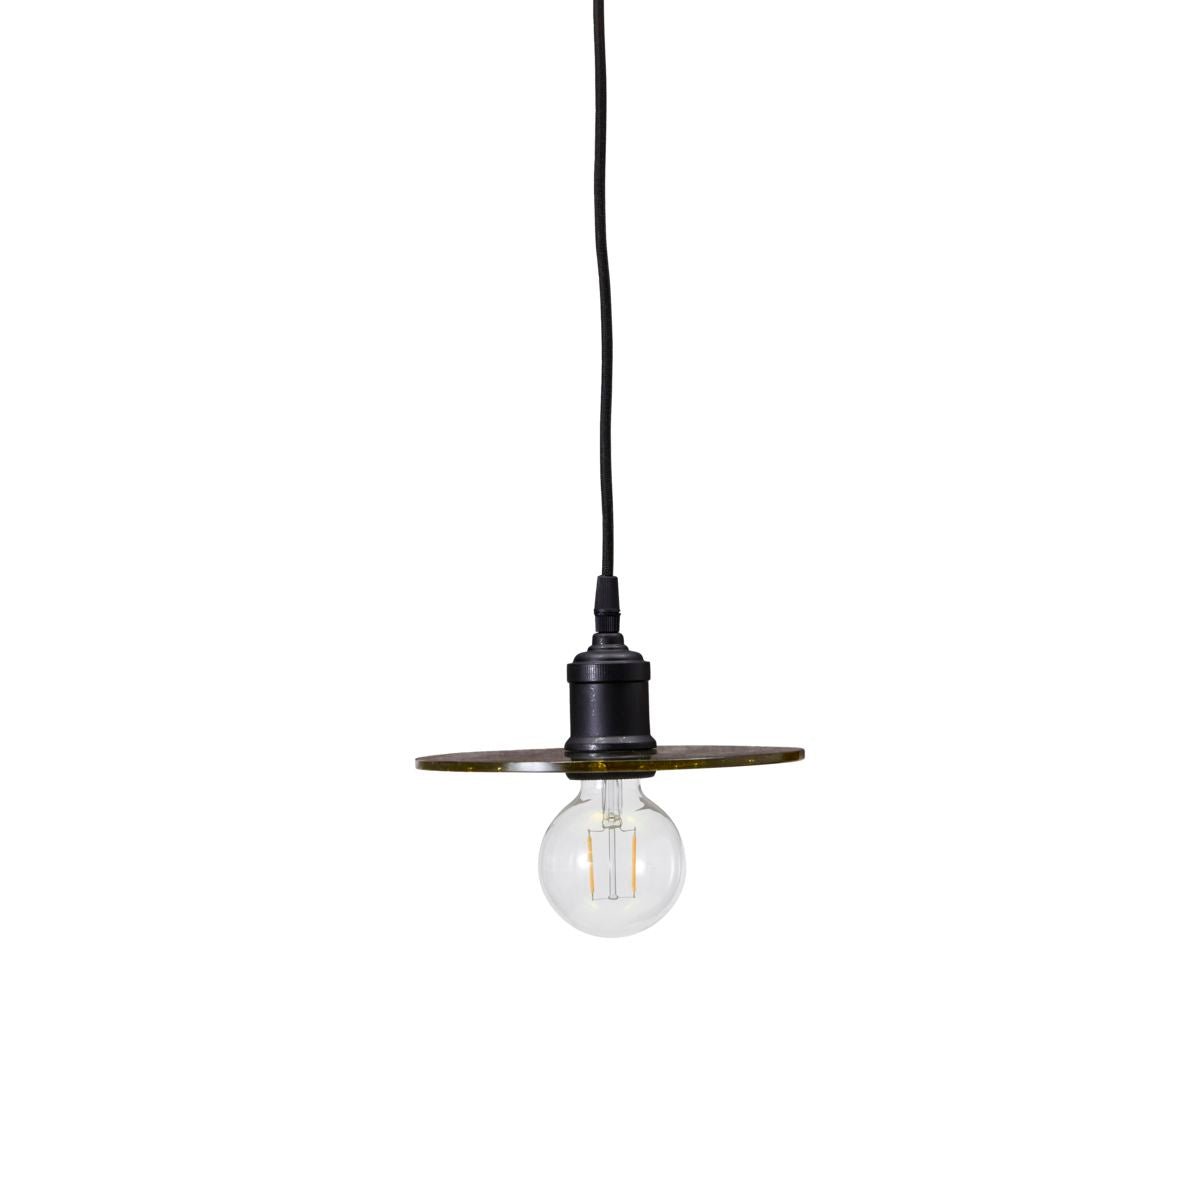 Lamp - Hover - Olive green Lamp by House Doctor